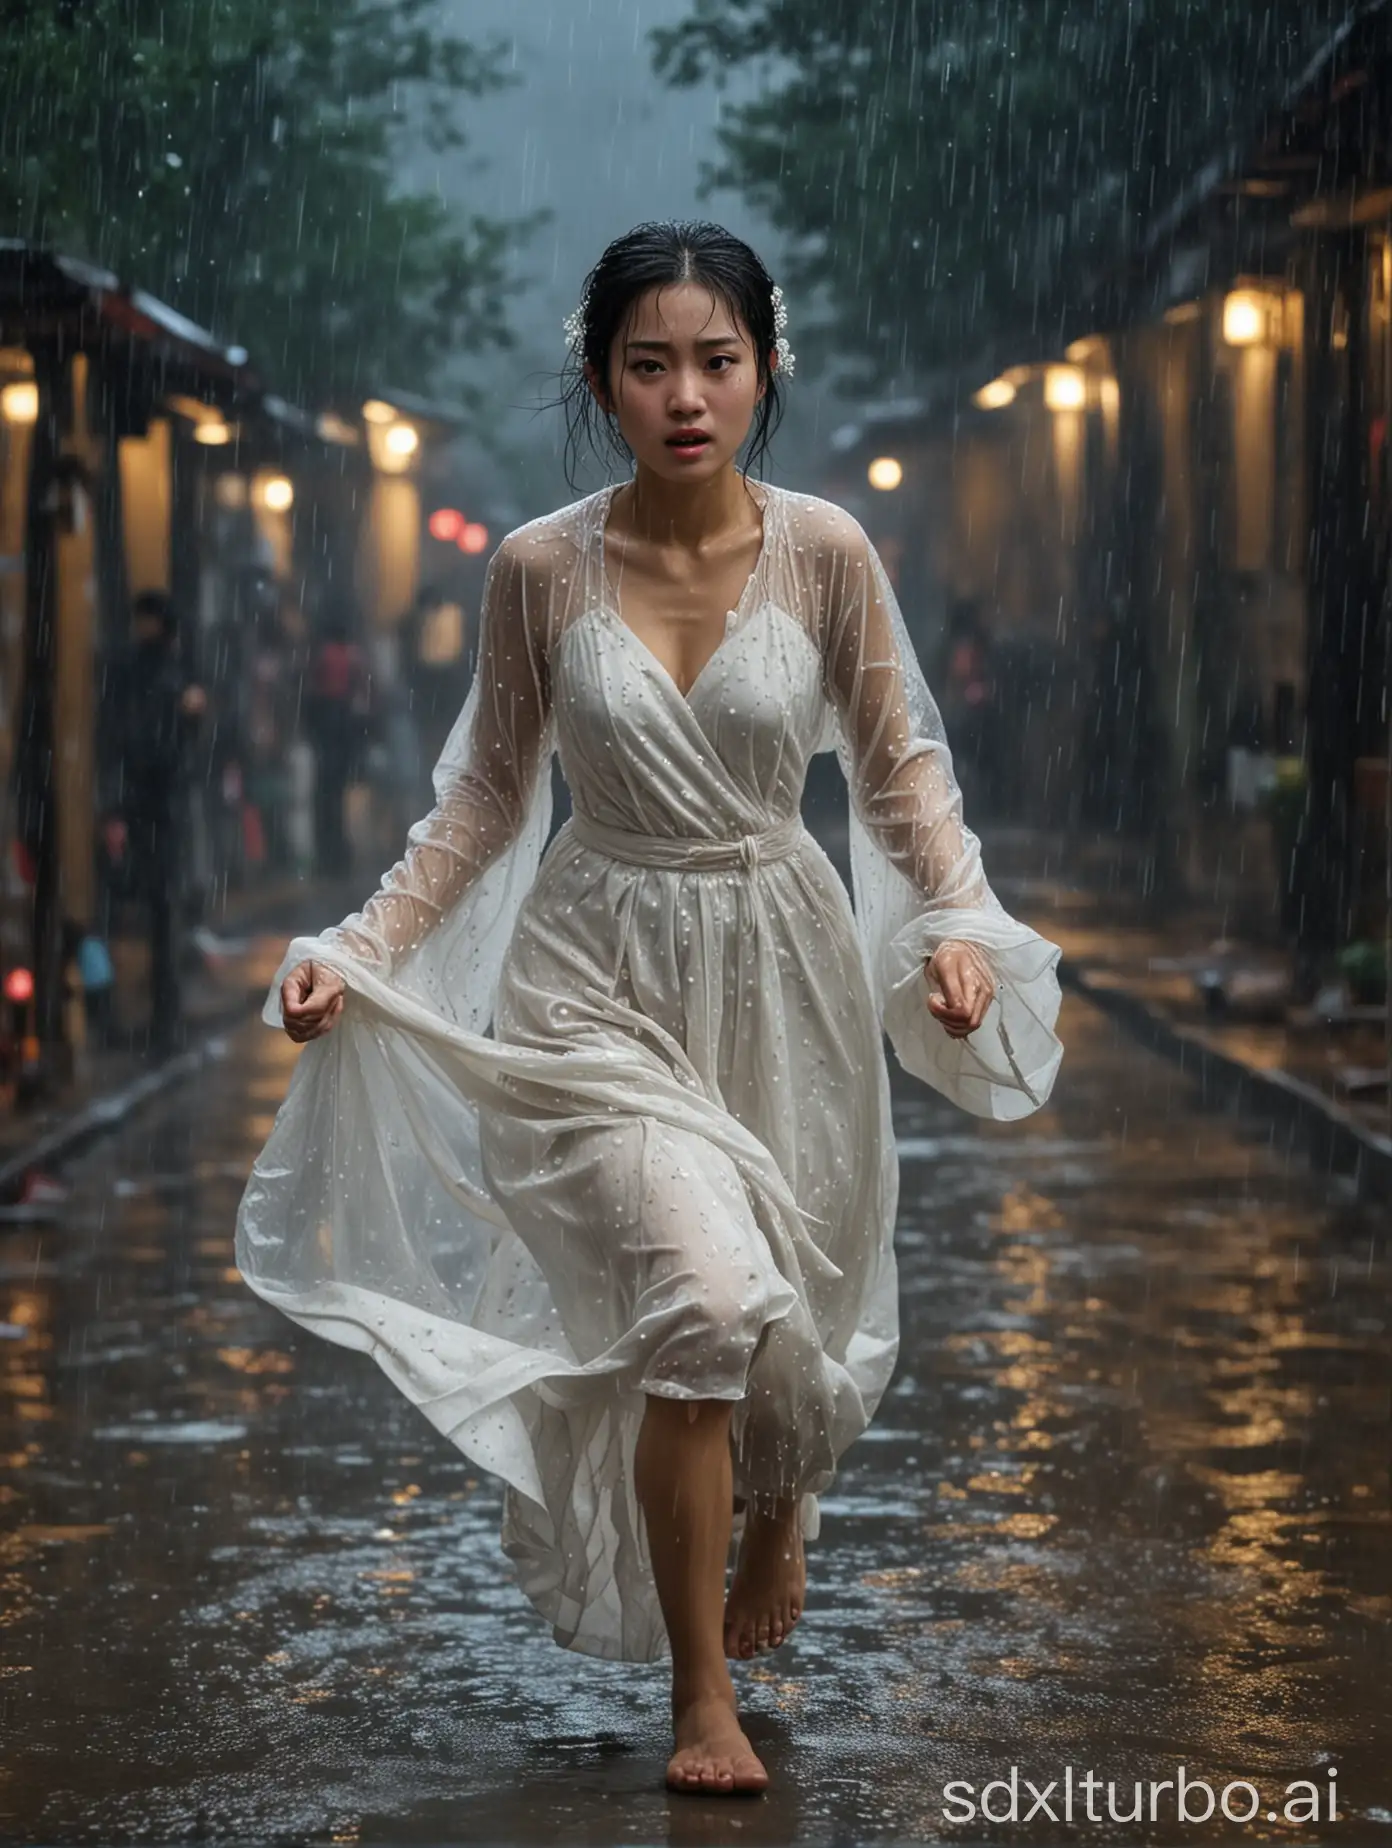 At night, a Chinese girl in a wedding dress is running sadly in the heavy rain.